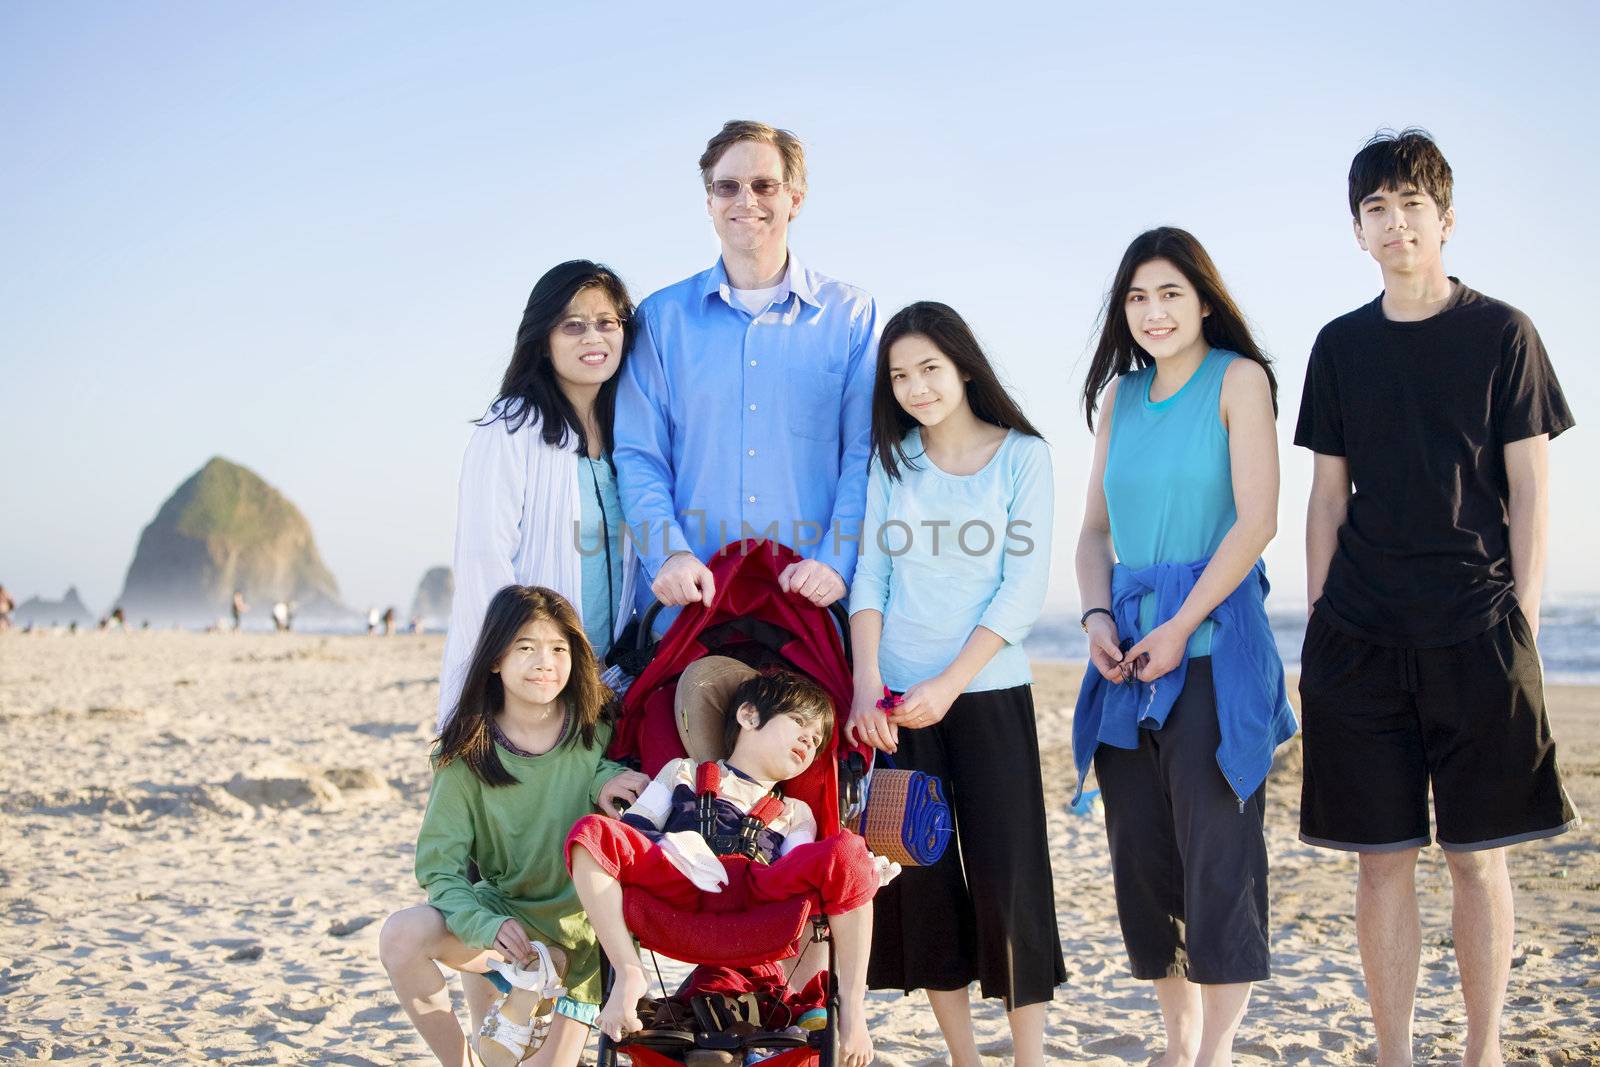 Large family of seven standing on the beach by the ocean. Boy in stroller is disabled with cerebral palsy.